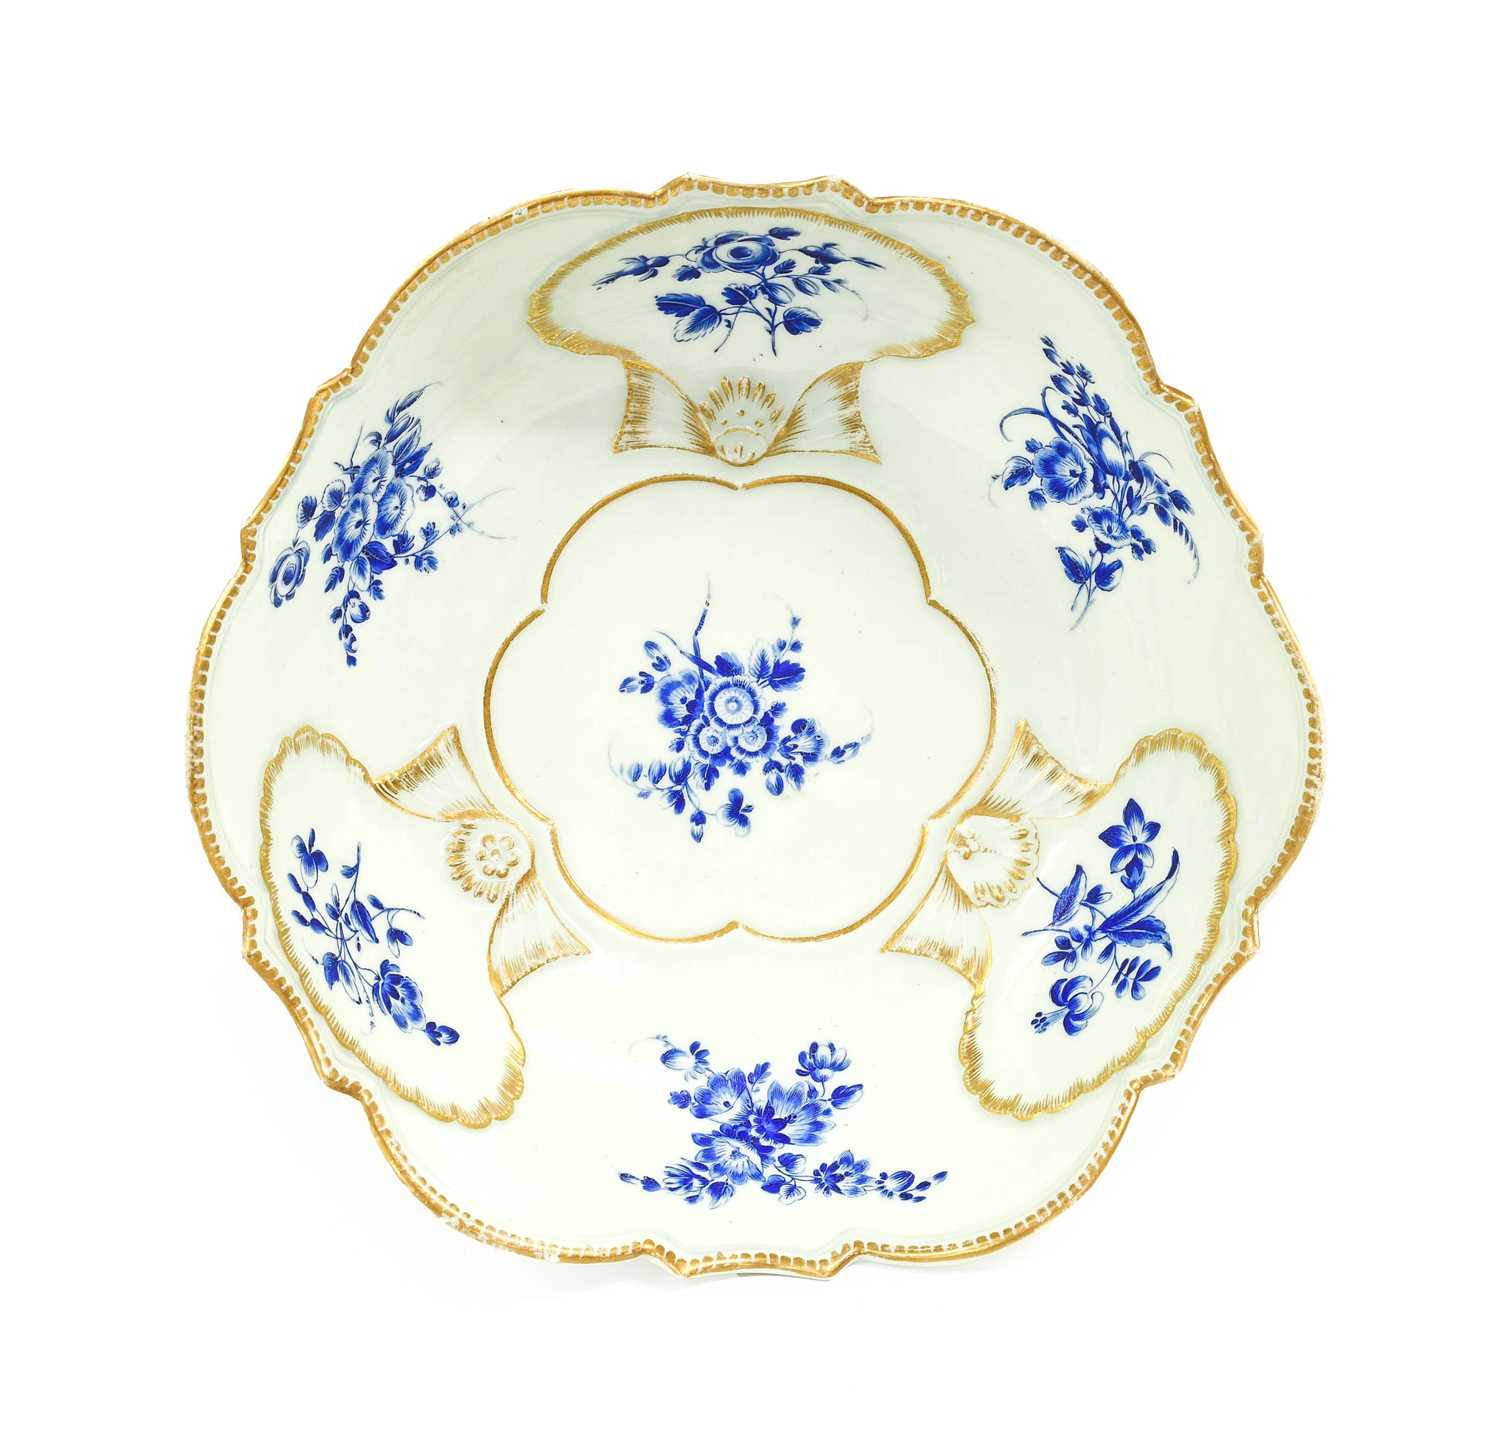 A Worcester Porcelain Junket Dish, circa 1770, with scalloped rim and moulded with shells, edged